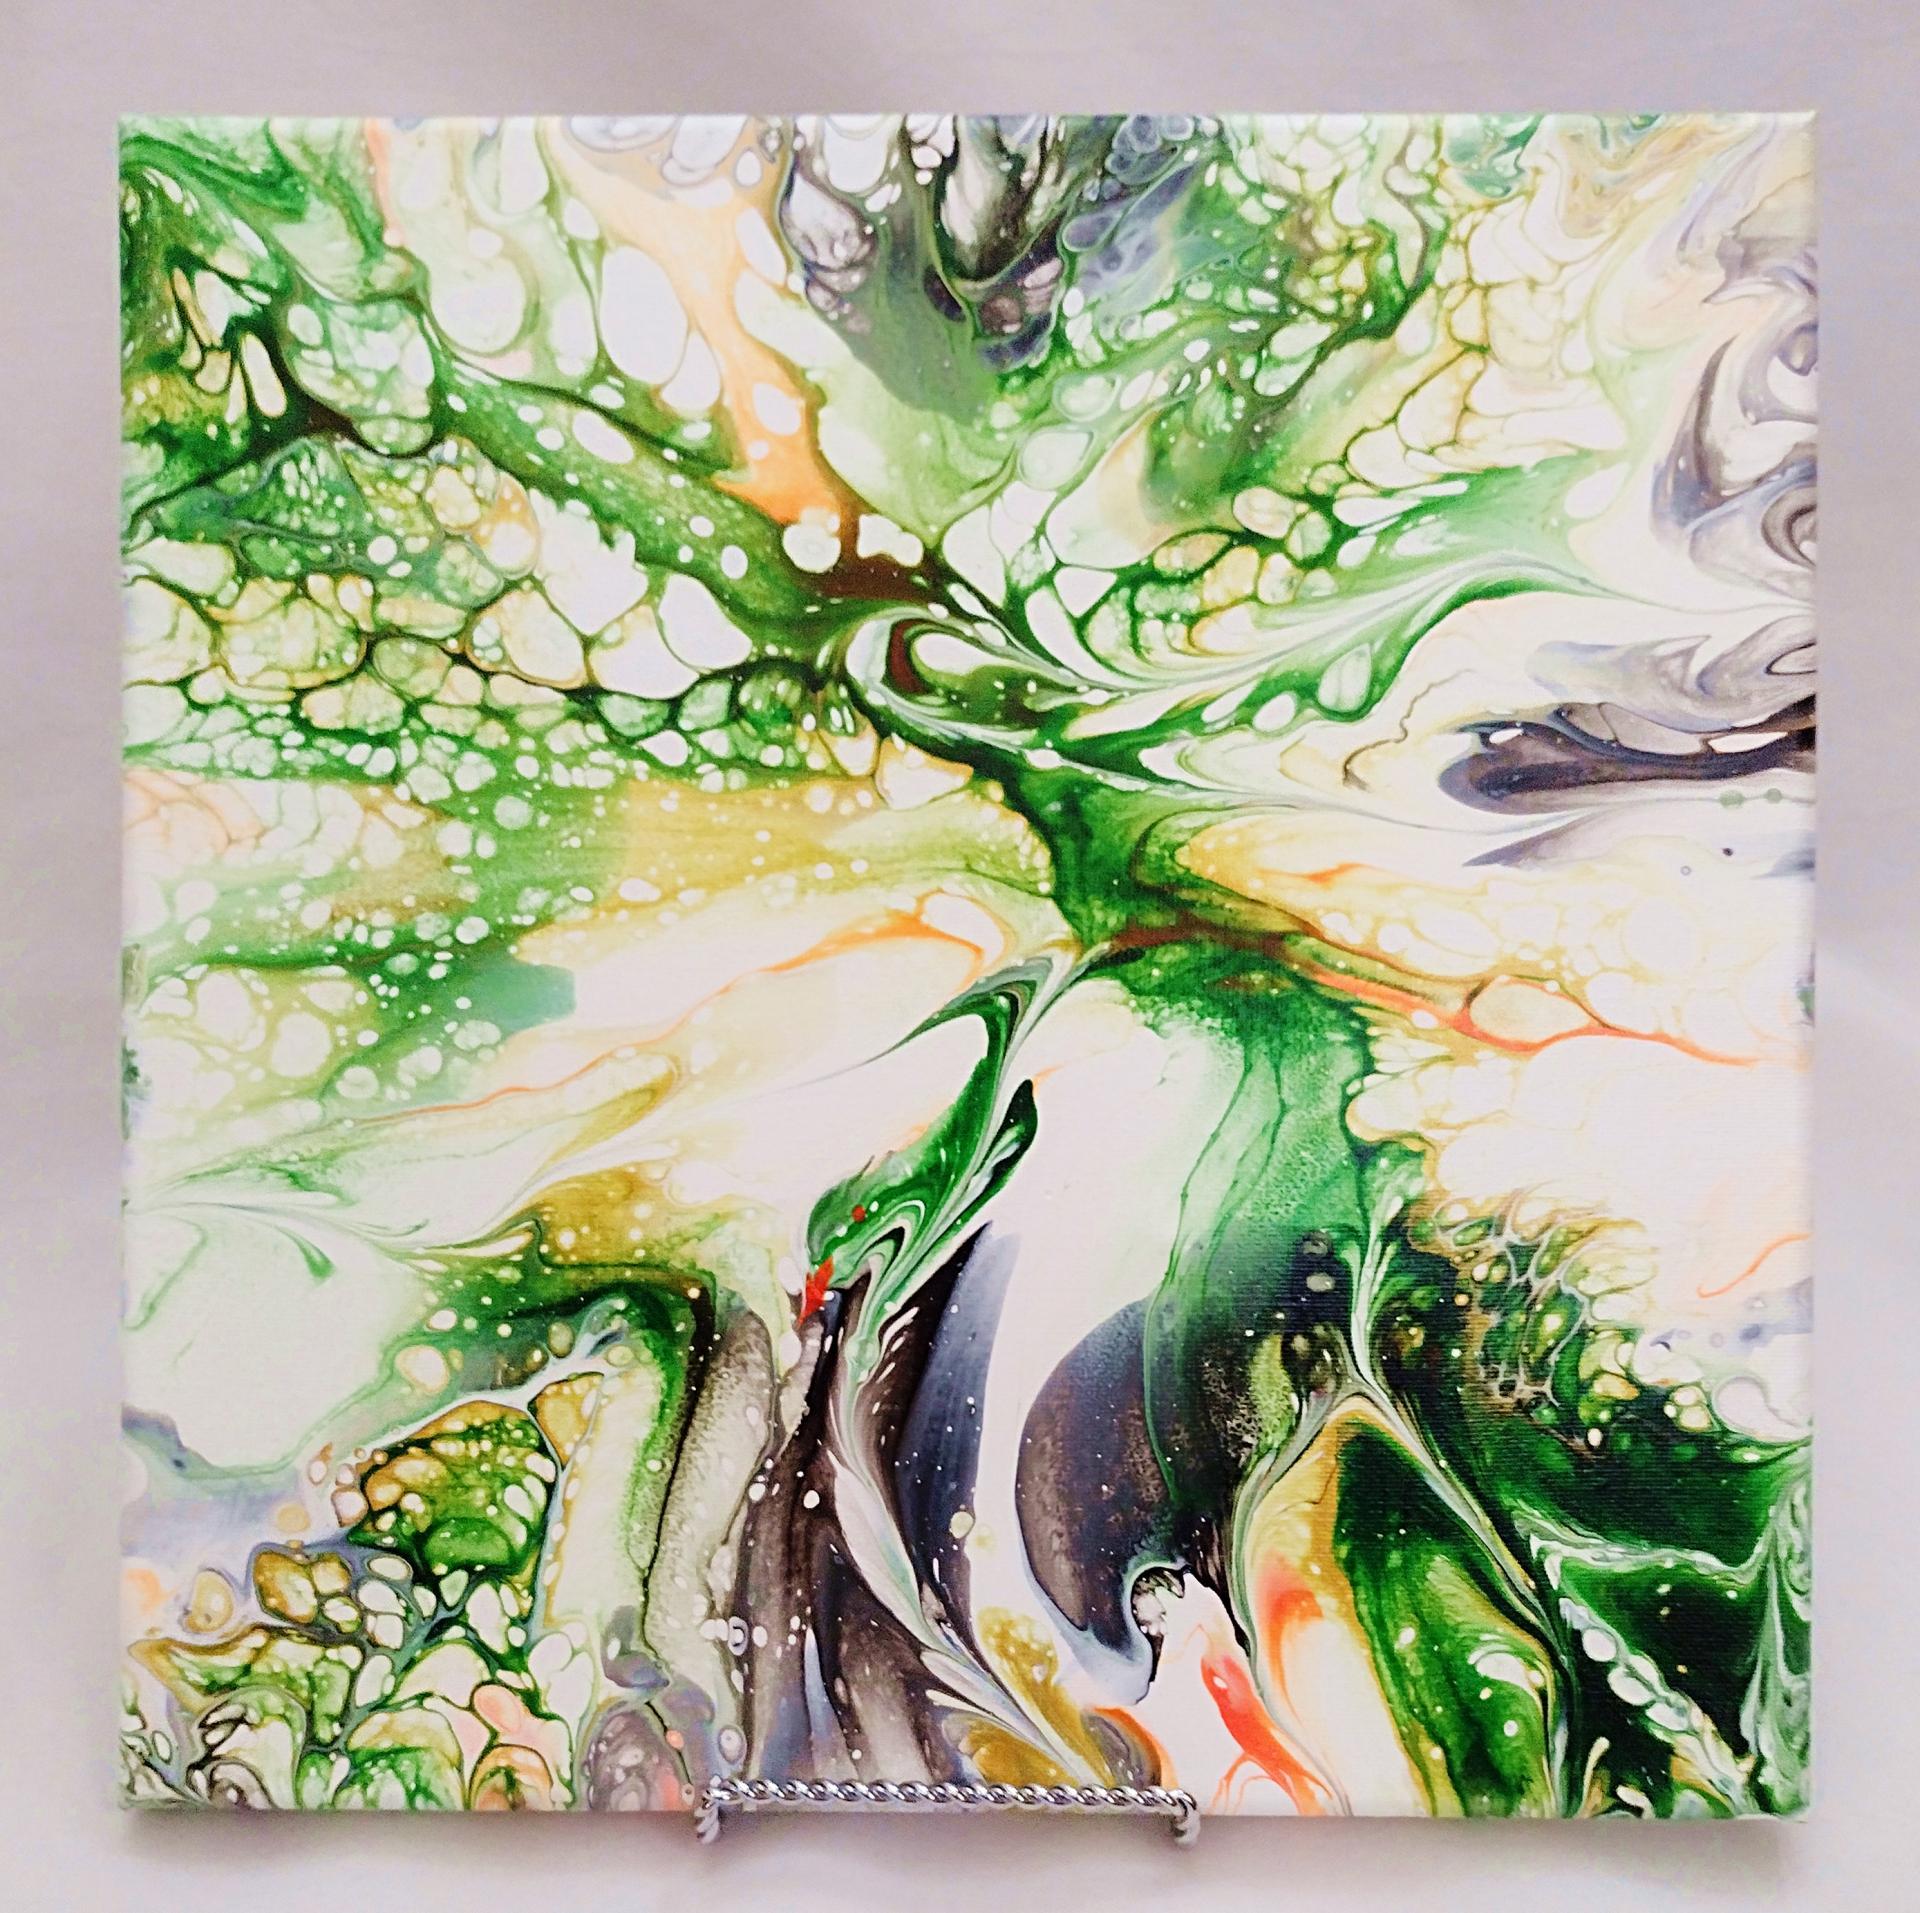 Green, Orange, and White Abstract Original Acrylic Pour Painting, 12" x 12", Fluid Art Painting